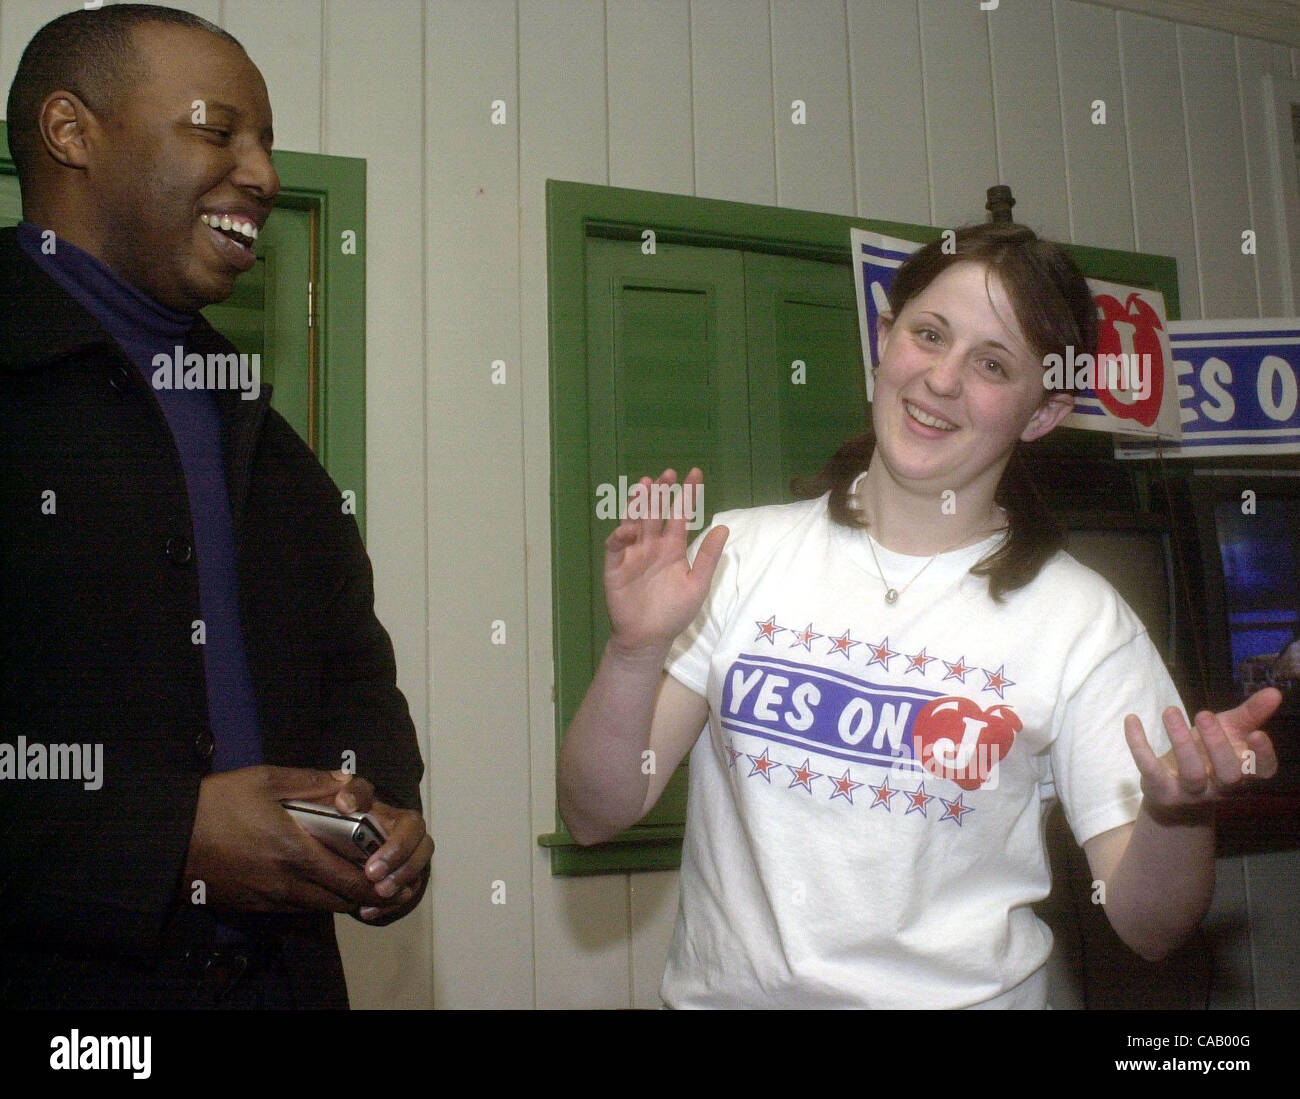 George Harris III introduces Vanessa Pratt, 17, of Kensington, an El Cerrito High School student who dedicated her Saturday mornings to help organize the Measure J campaign at election night party at Chevy's restaurant in Richmond, Calif., on Tuesday March 02, 2004. Pratt was involved with student o Stock Photo